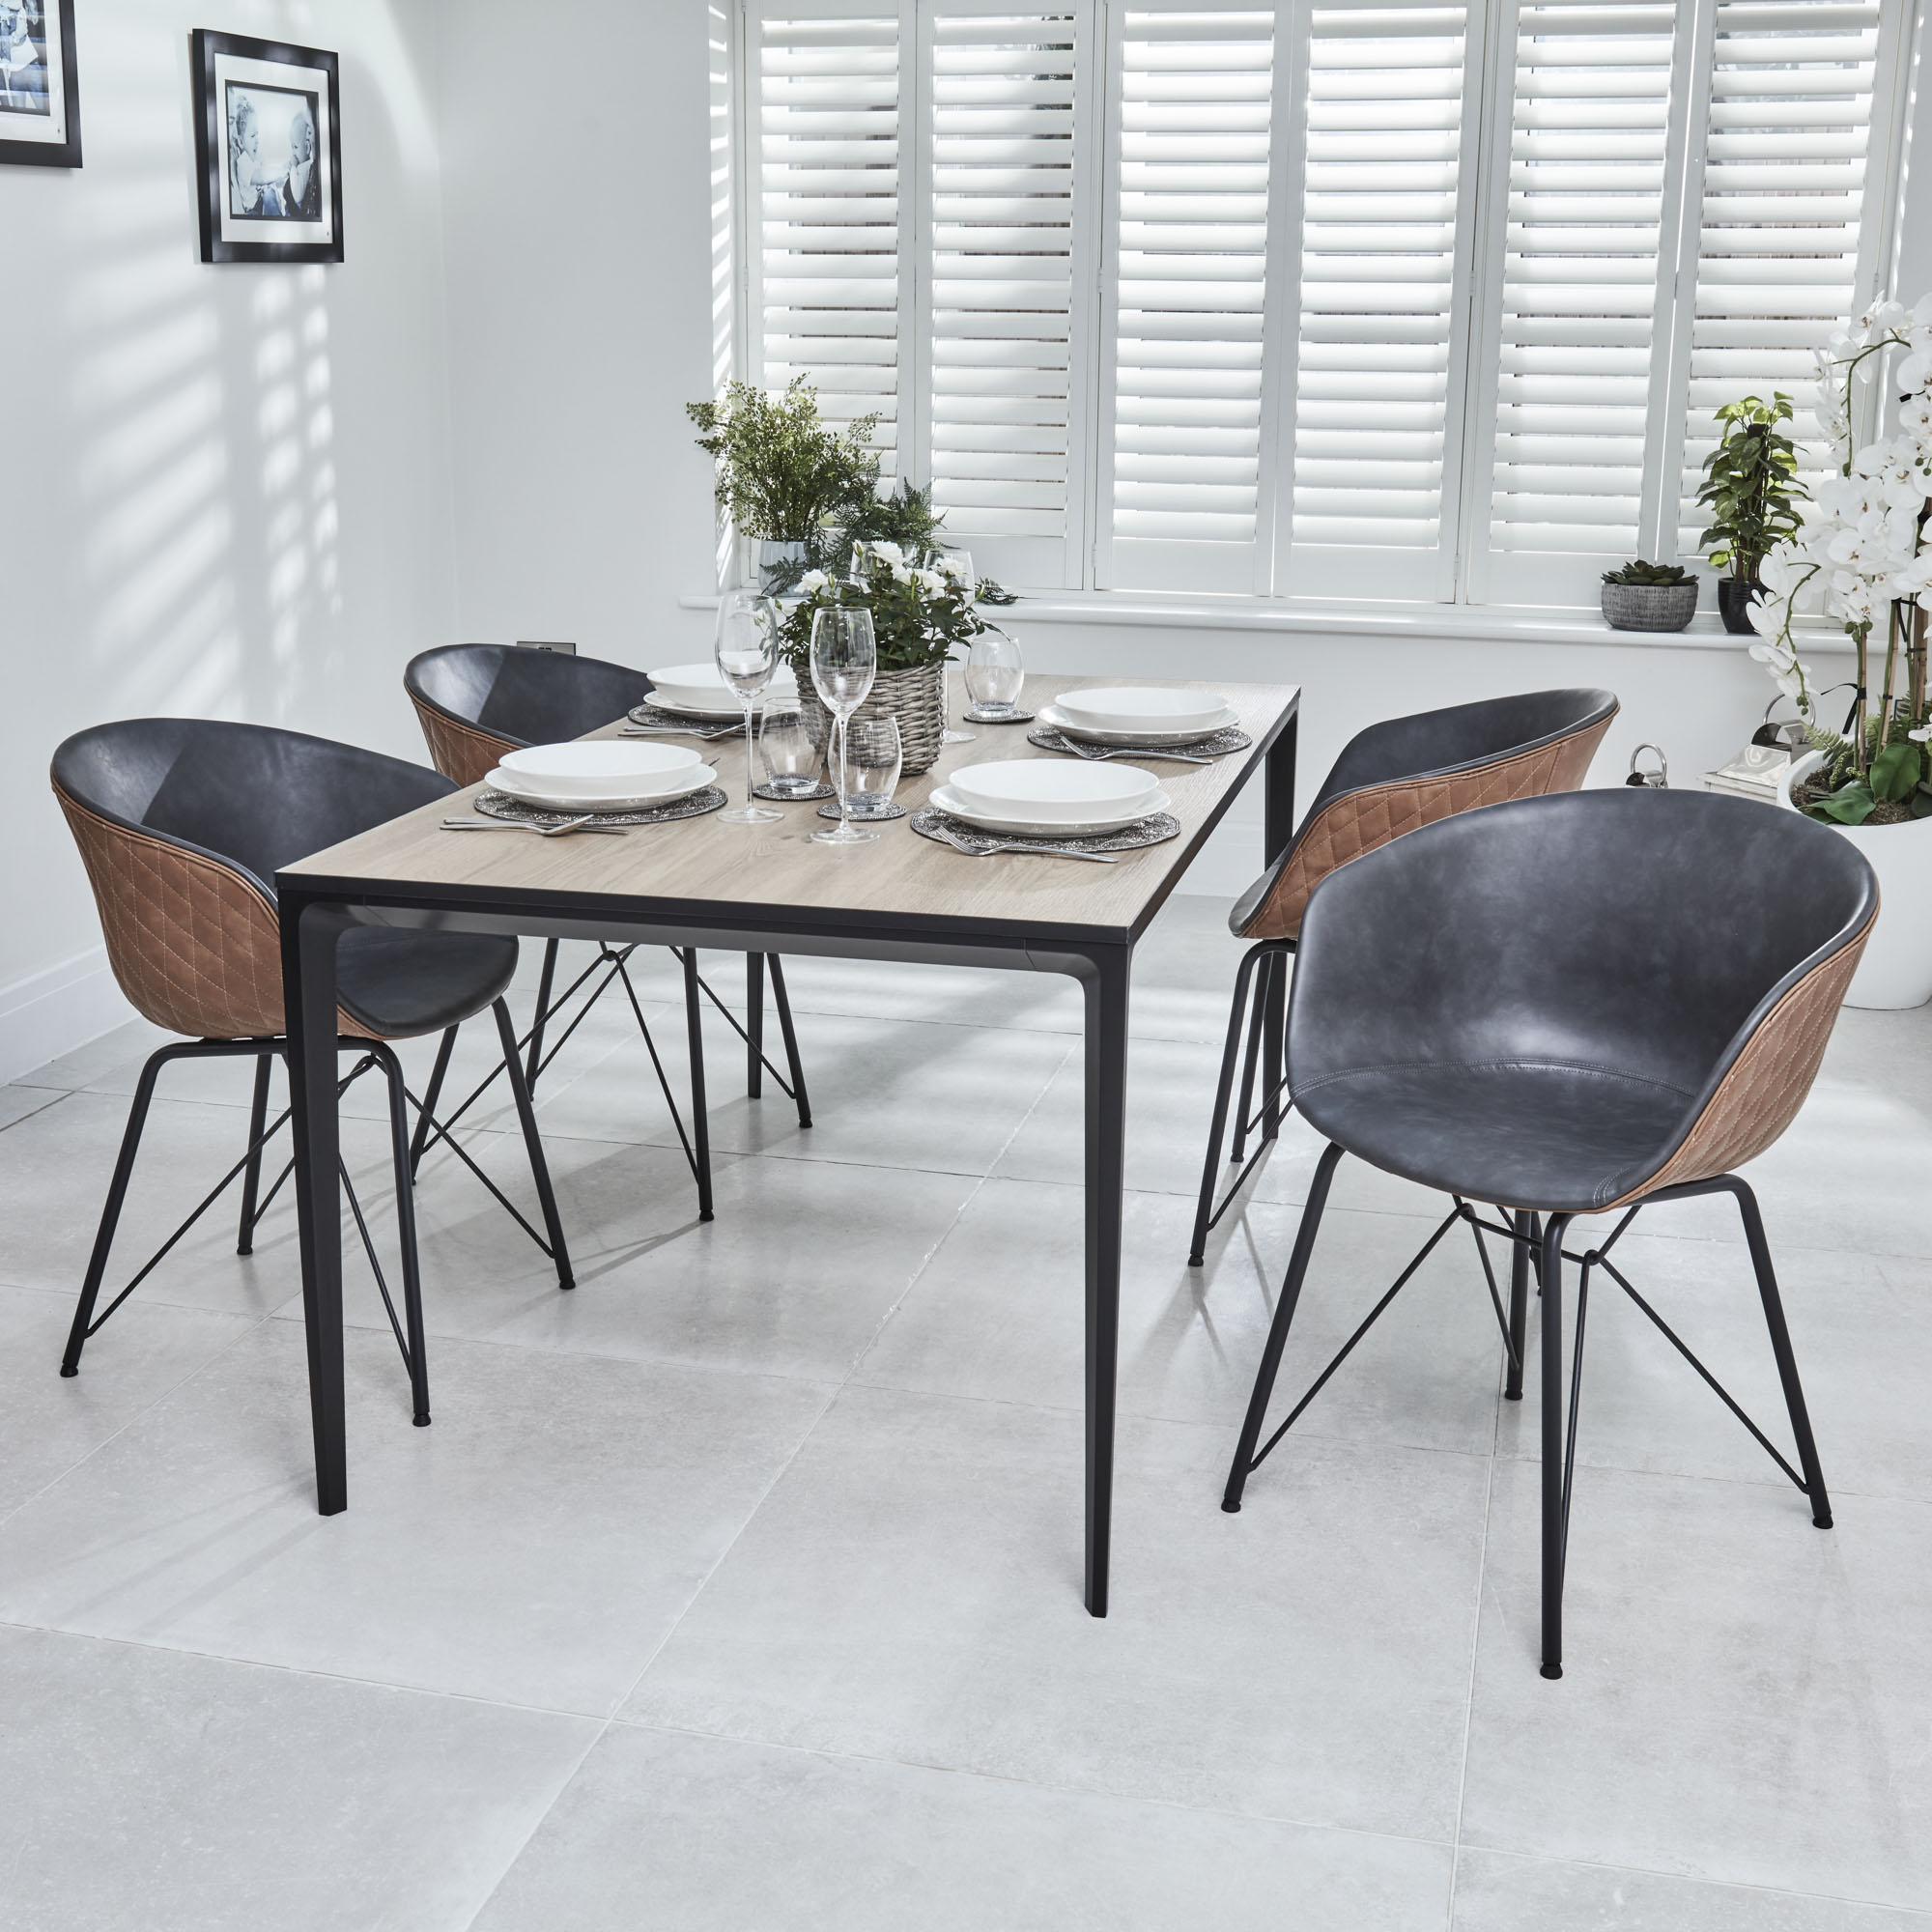 Bellagio 1.6M Natural Oak Melamine Dining Table Set with 4x Camila Grey/Tan Dining Chairs